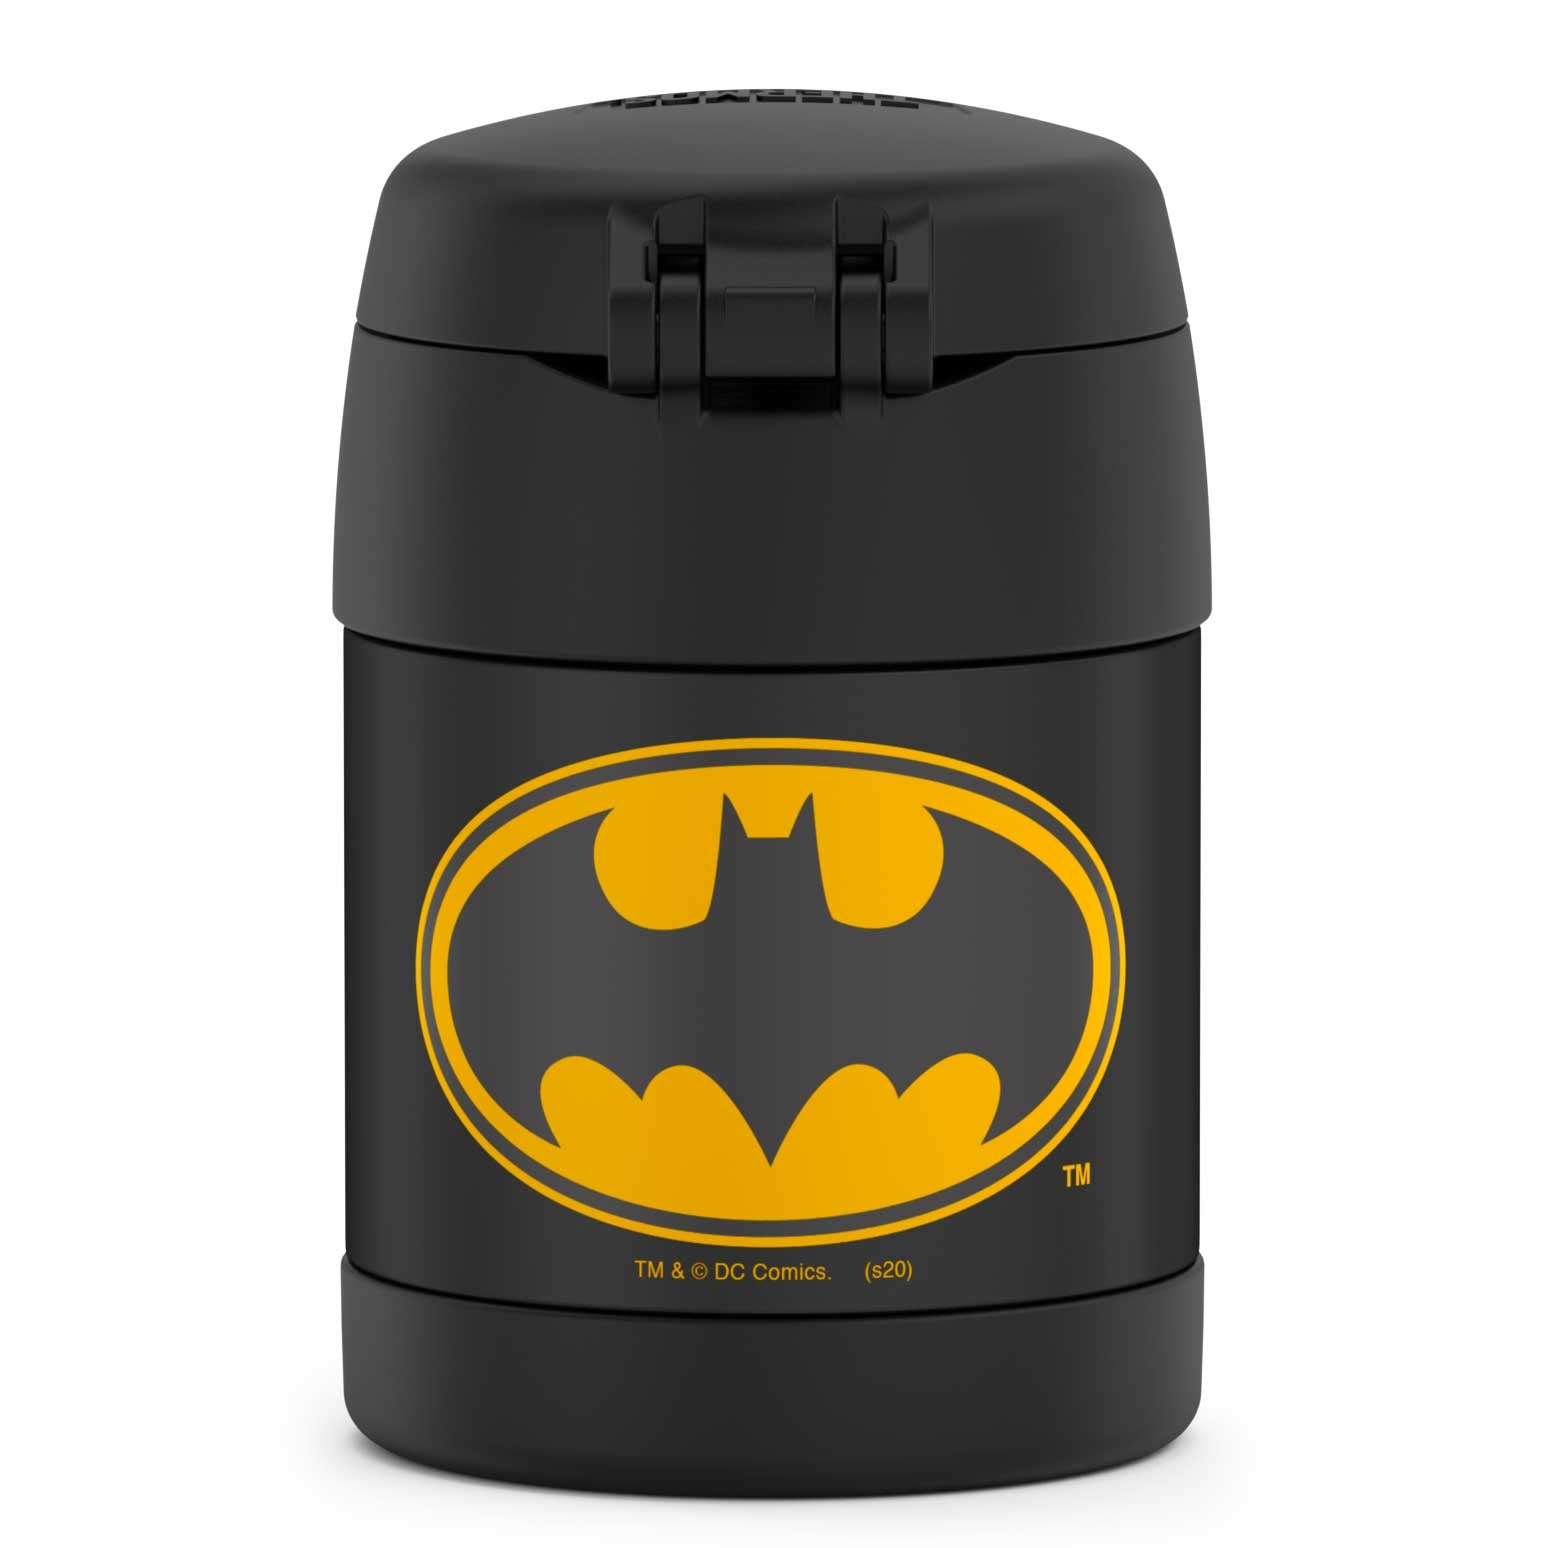 Thermos 12oz FUNtainer Water Bottle with Bail Handle - Black Batman